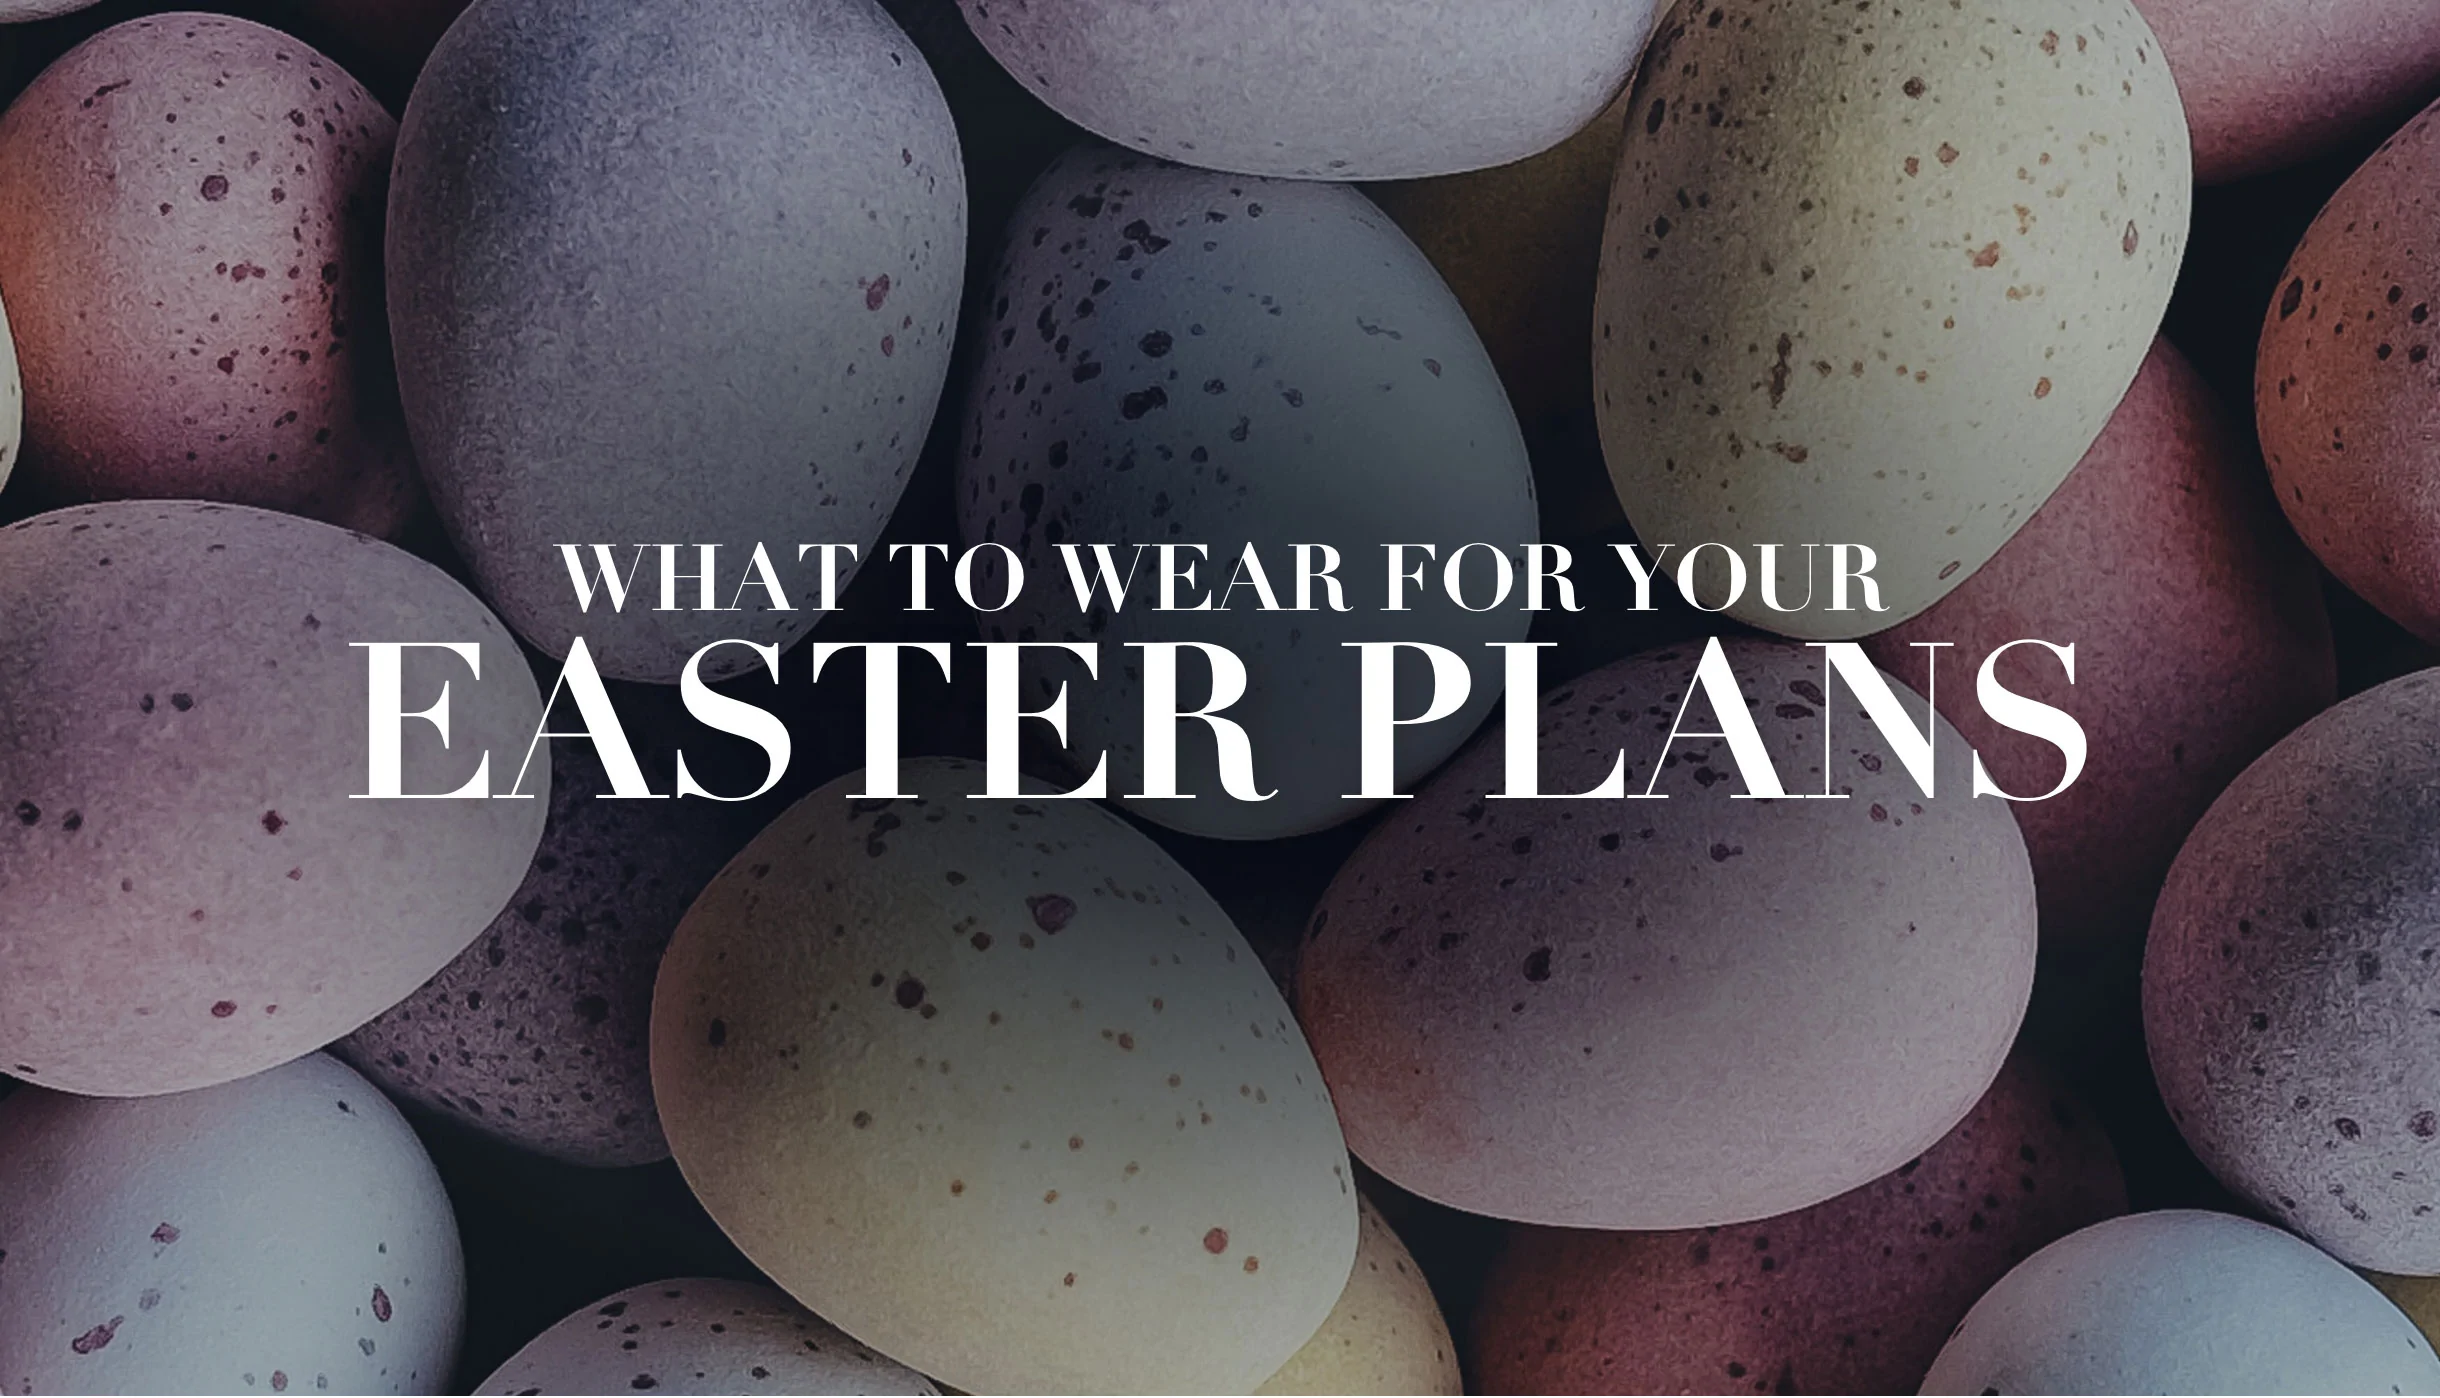 What to Wear for Your Easter Plans